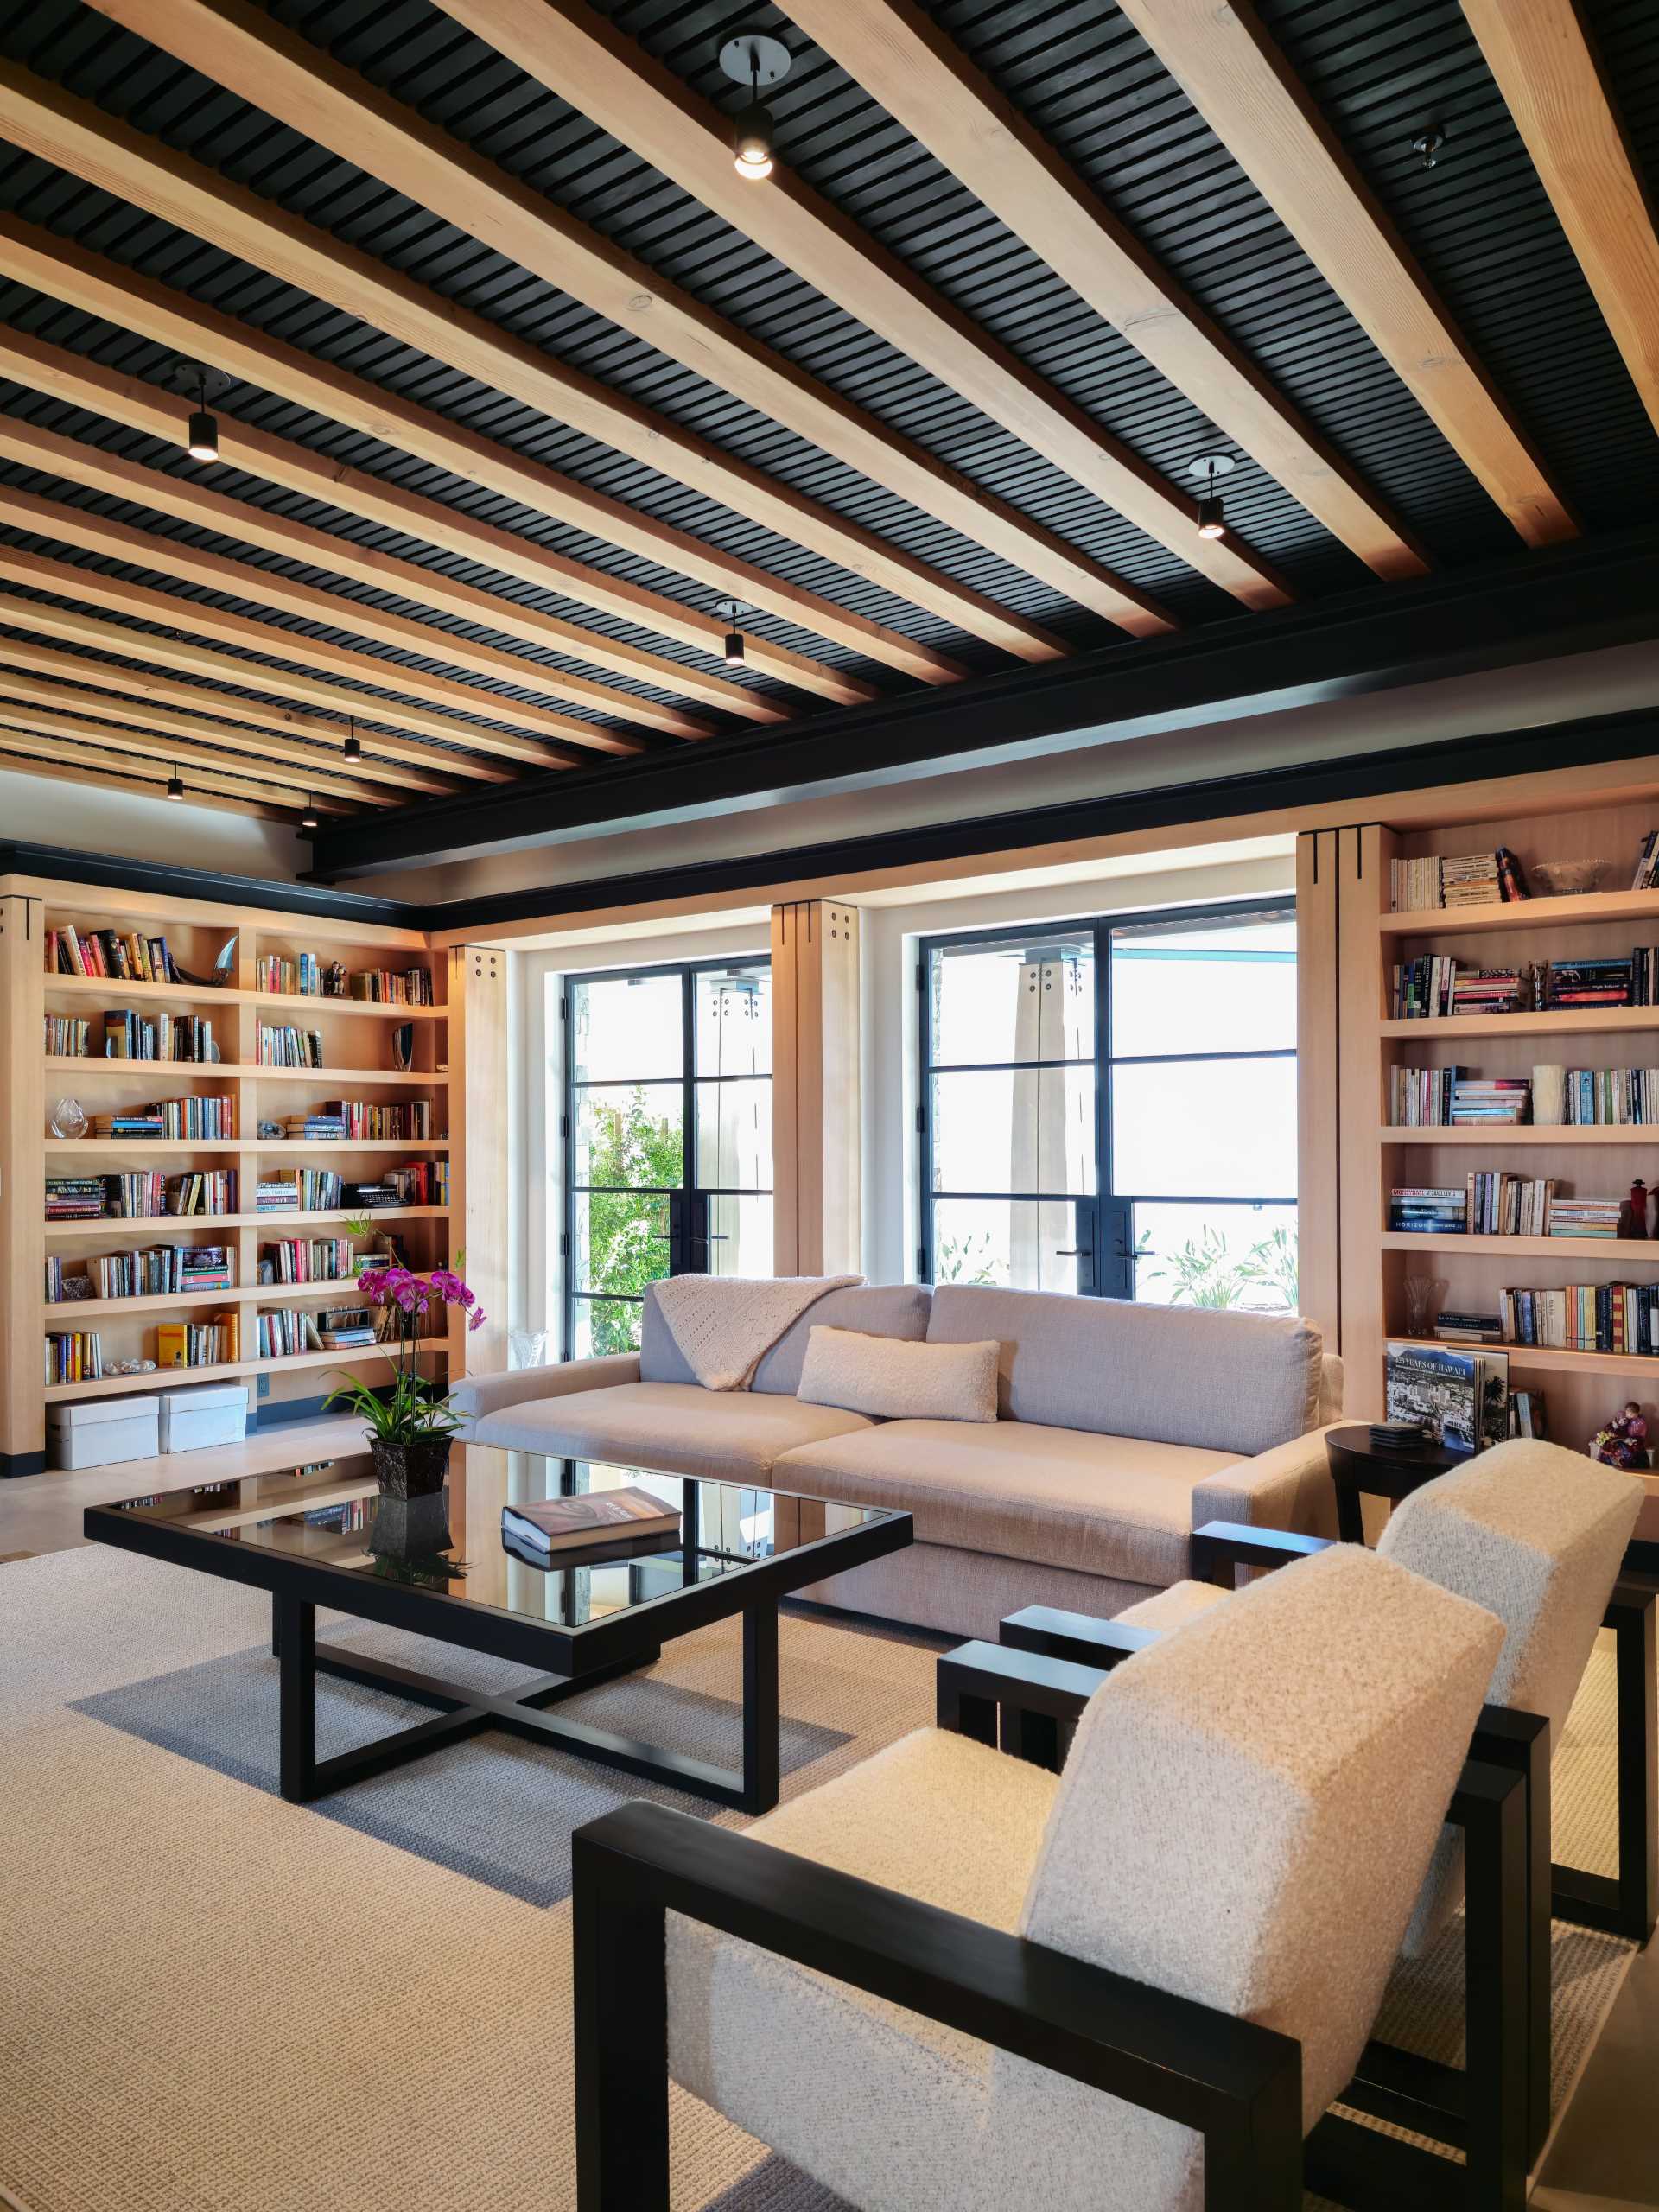 A contemporary house with built-in bookshelves.